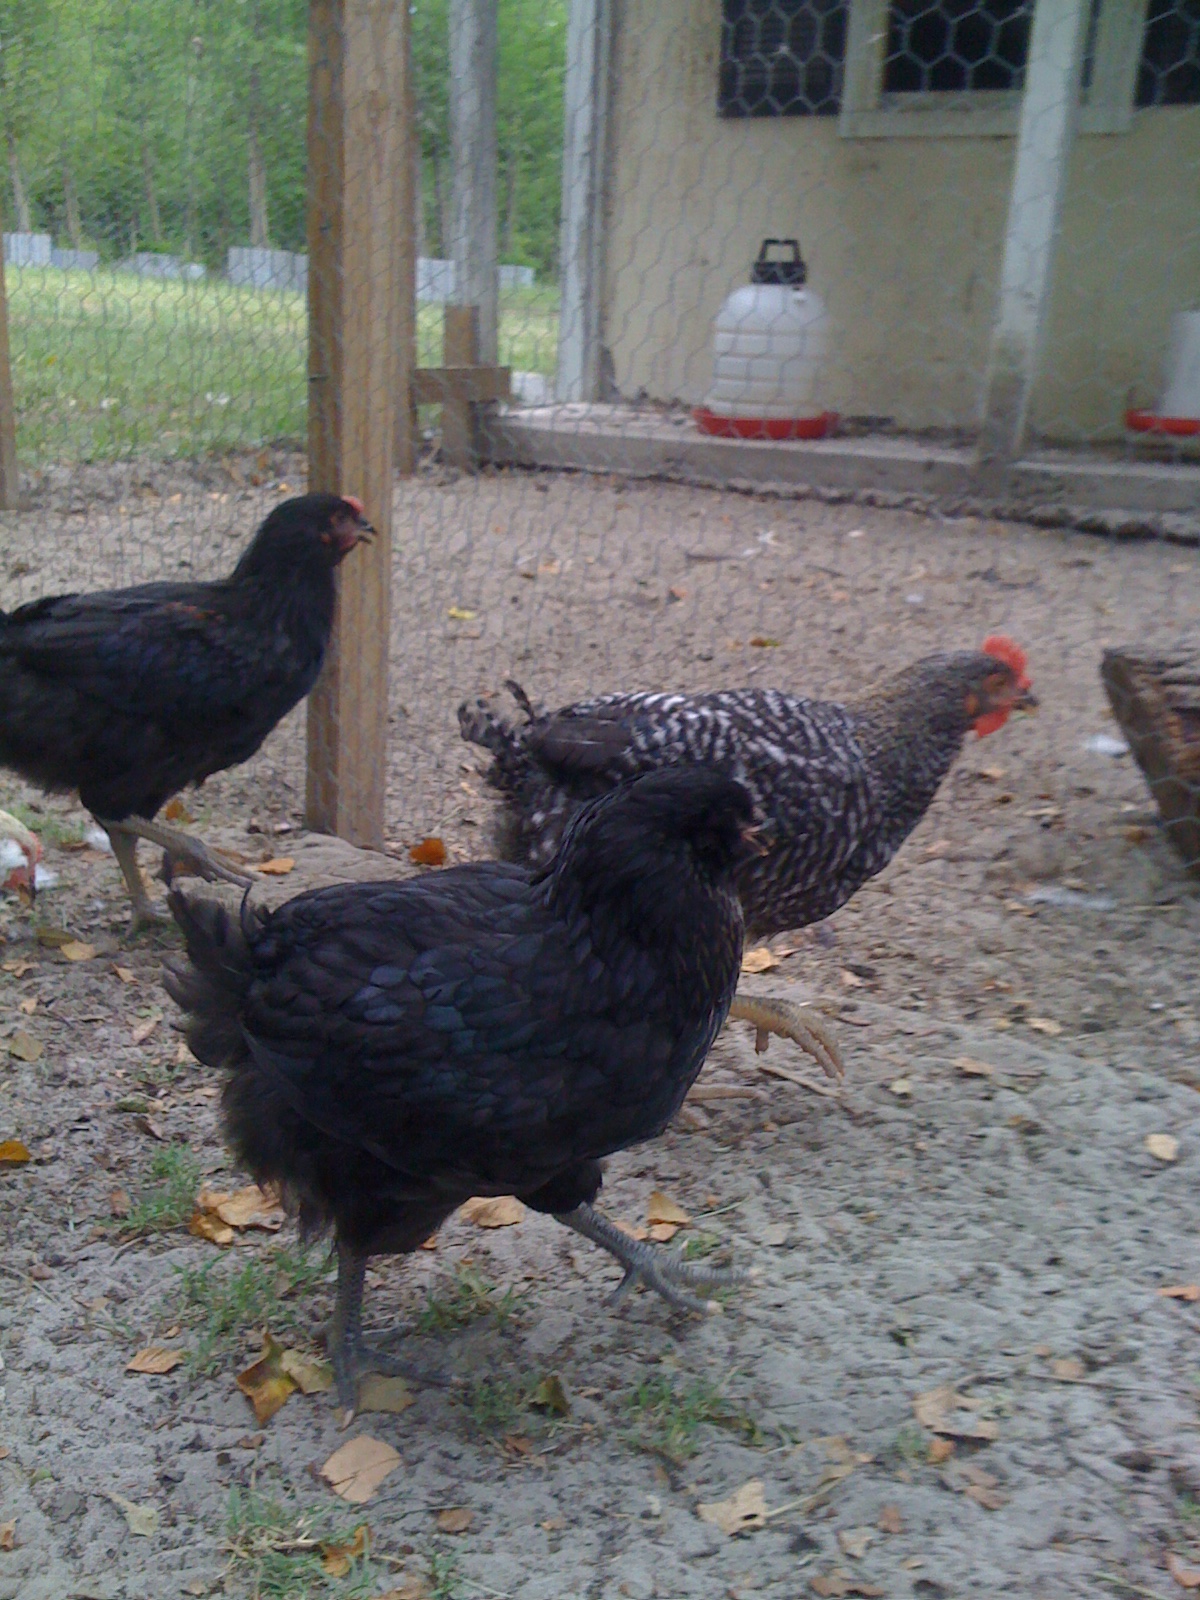 The black ones..pullets or cockerels? Both have pea cobs from what I can tell, but one is slightly larger than the other.